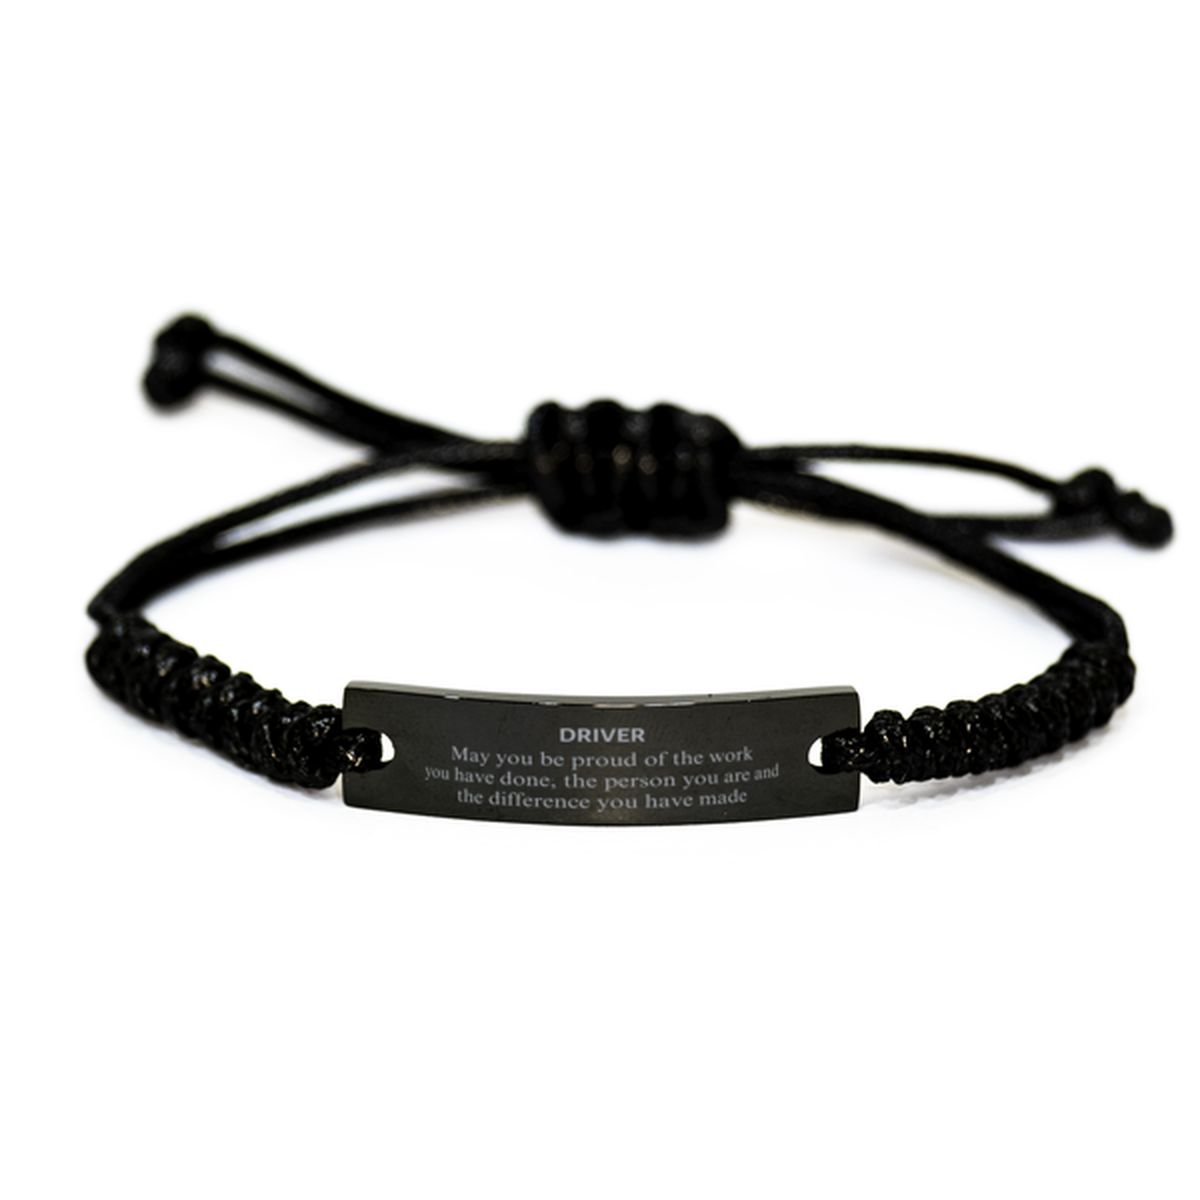 Driver May you be proud of the work you have done, Retirement Driver Black Rope Bracelet for Colleague Appreciation Gifts Amazing for Driver